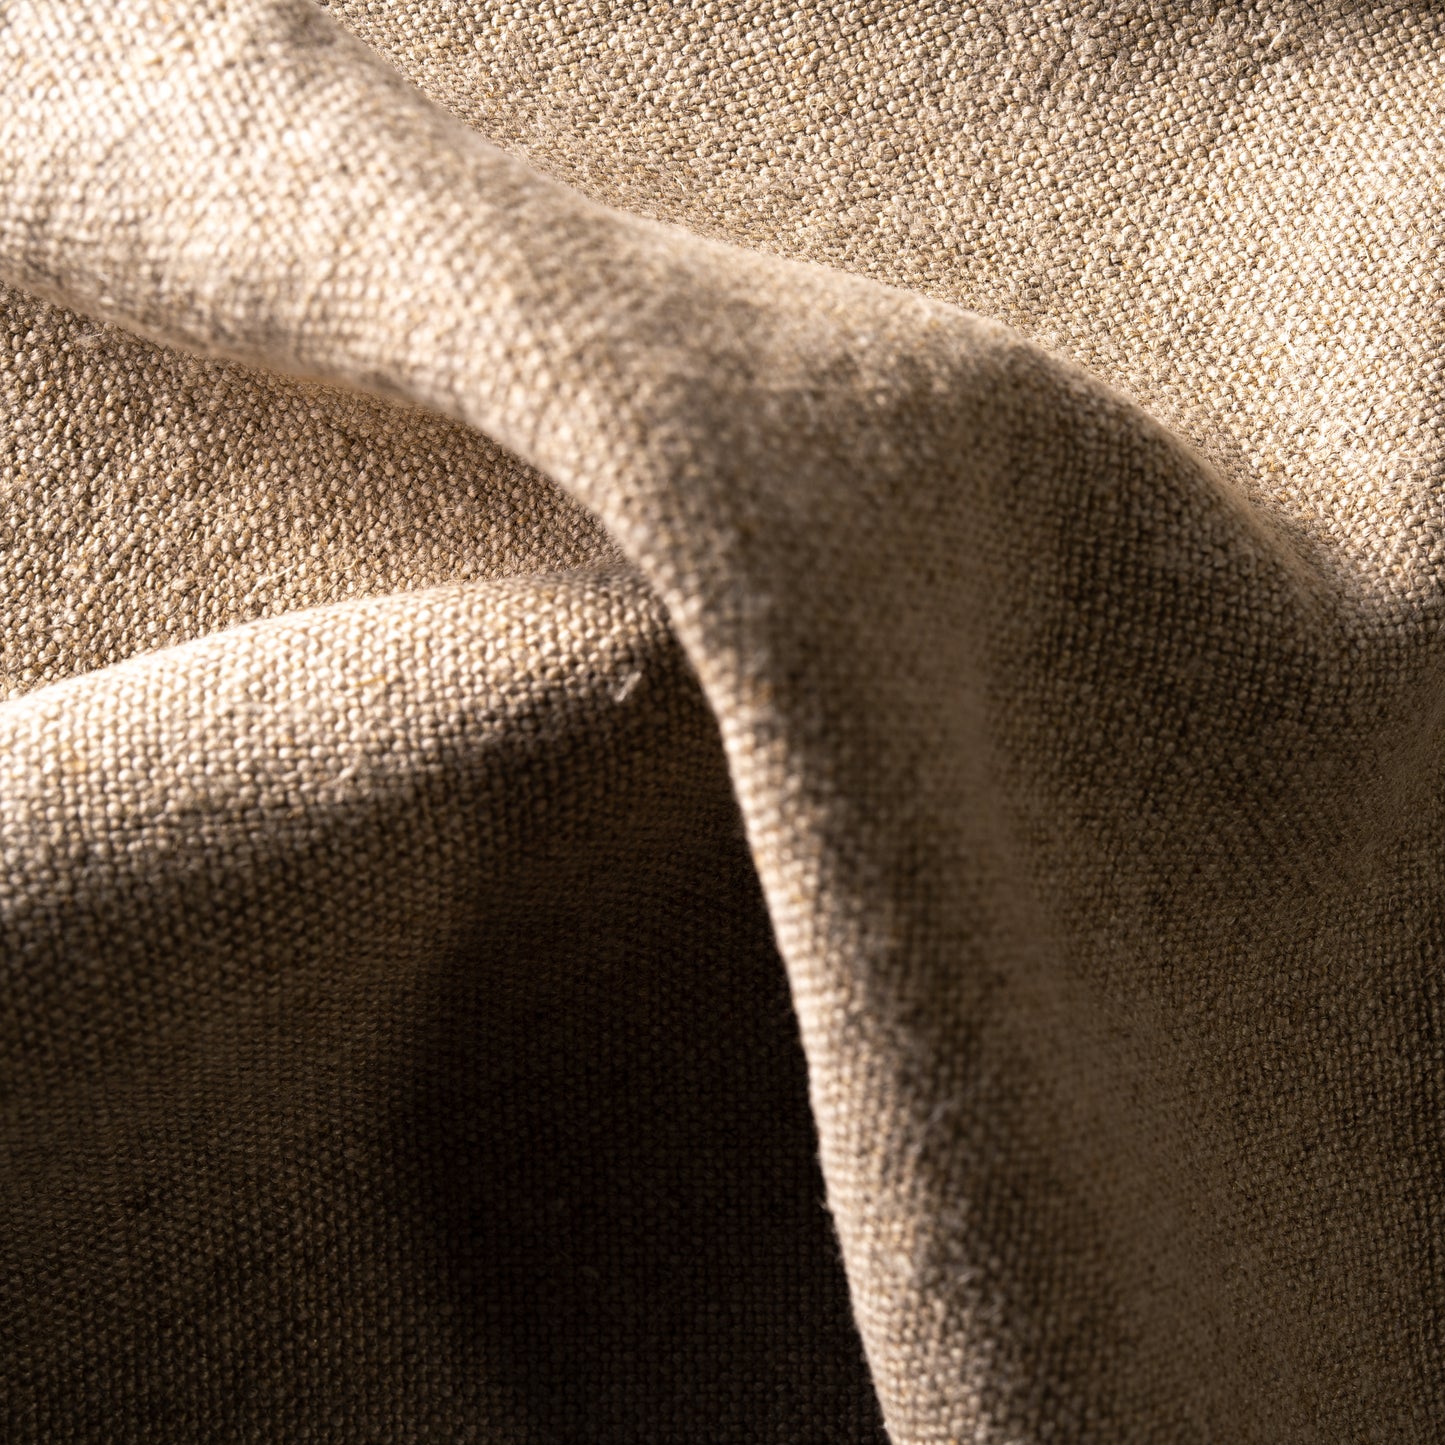 Upholstery Weight 100% Linen (12.5 oz/square yard) in Burlap Warm